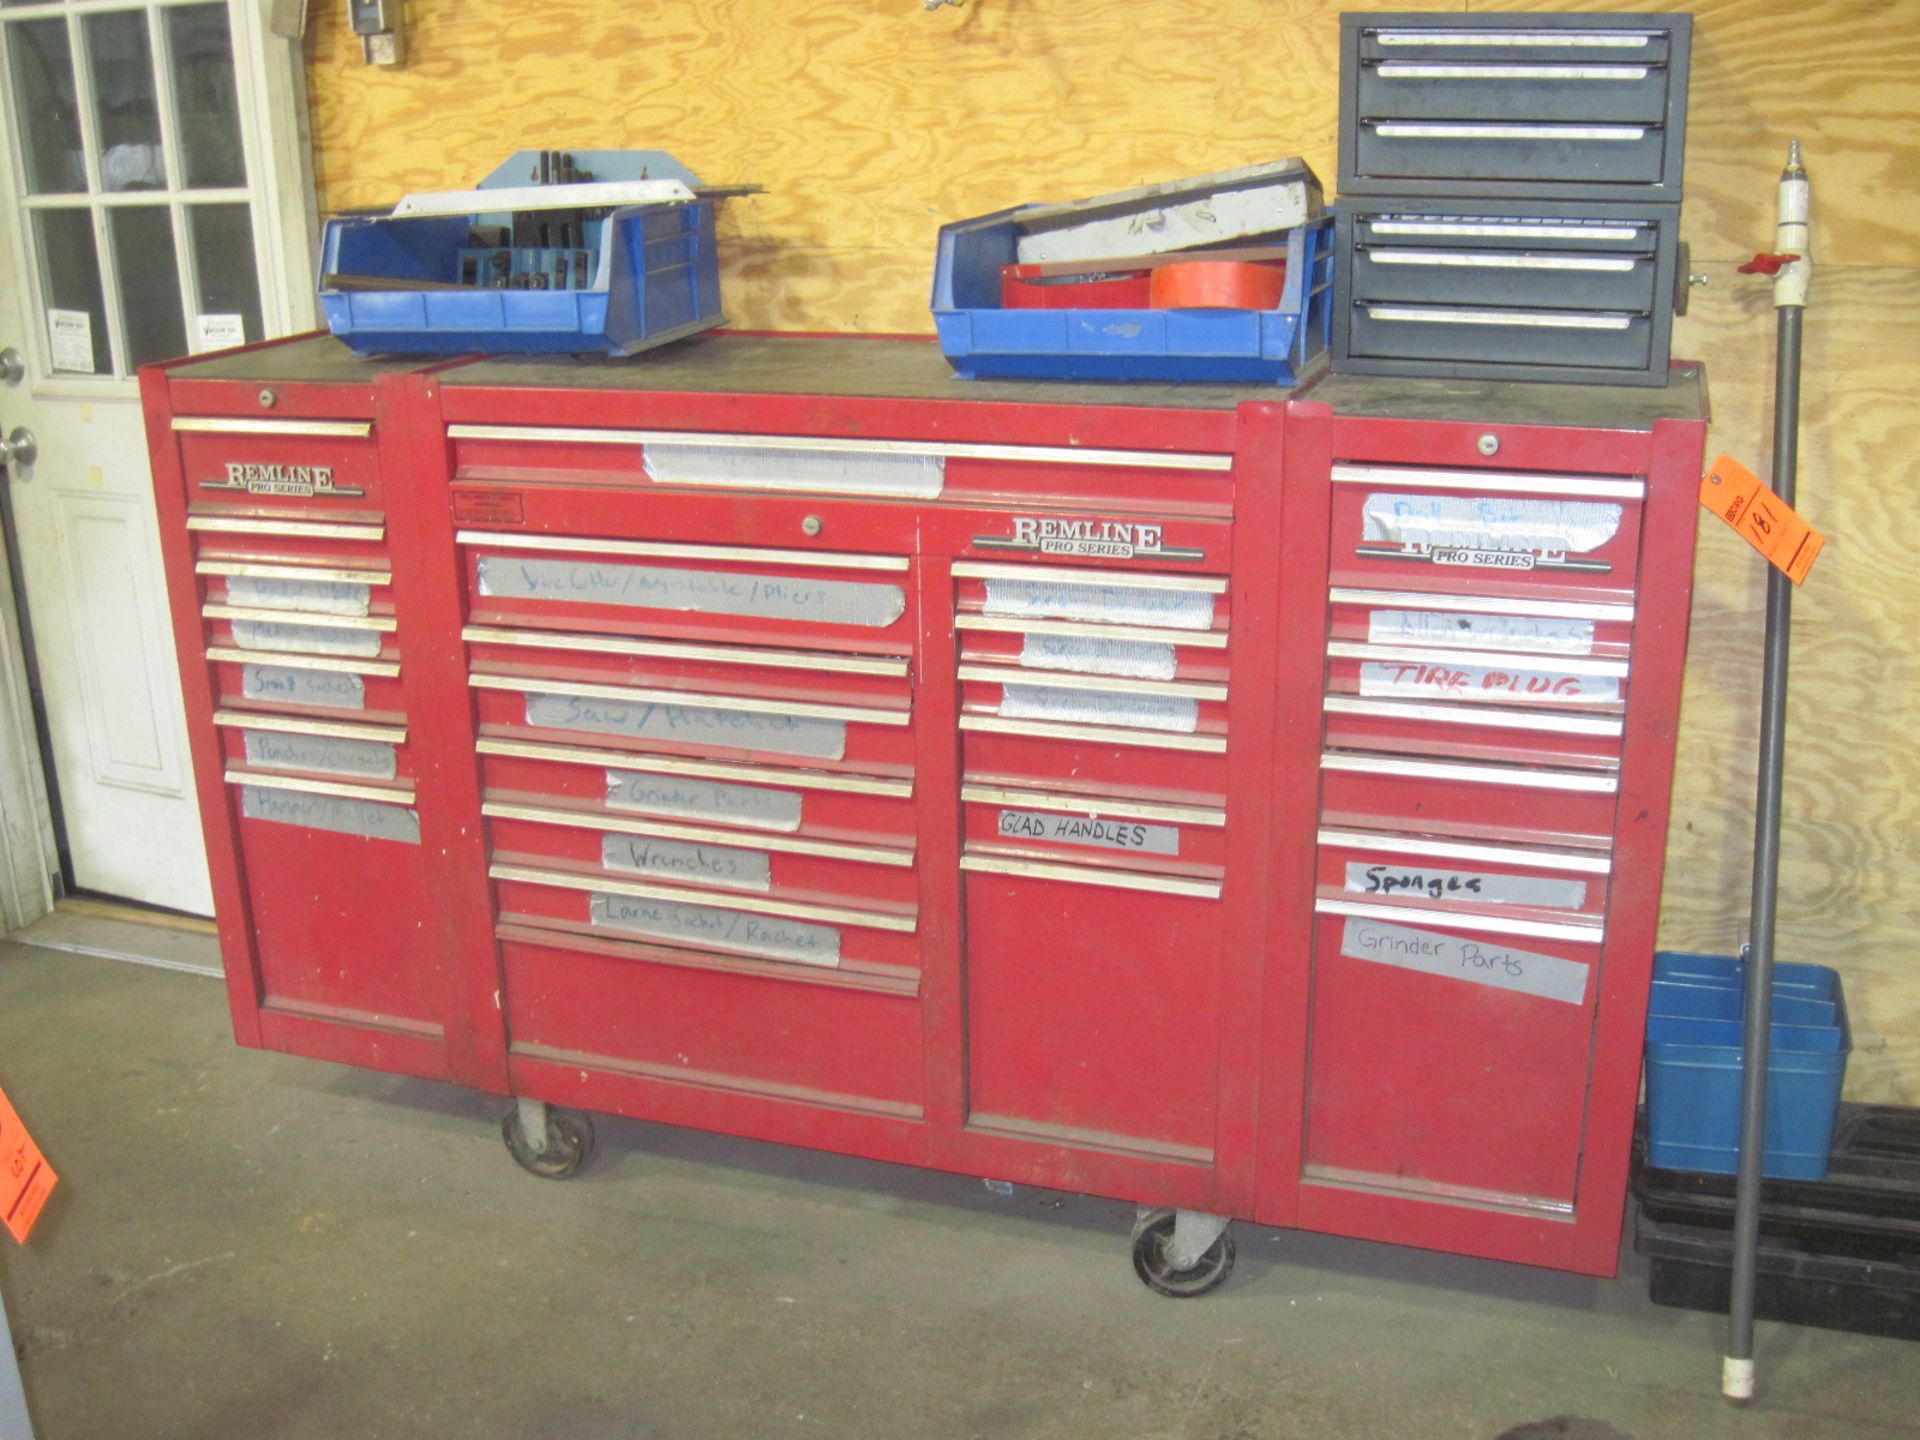 Remline 28 compartment portable tool chest including contents - every drawer is LOADED!!